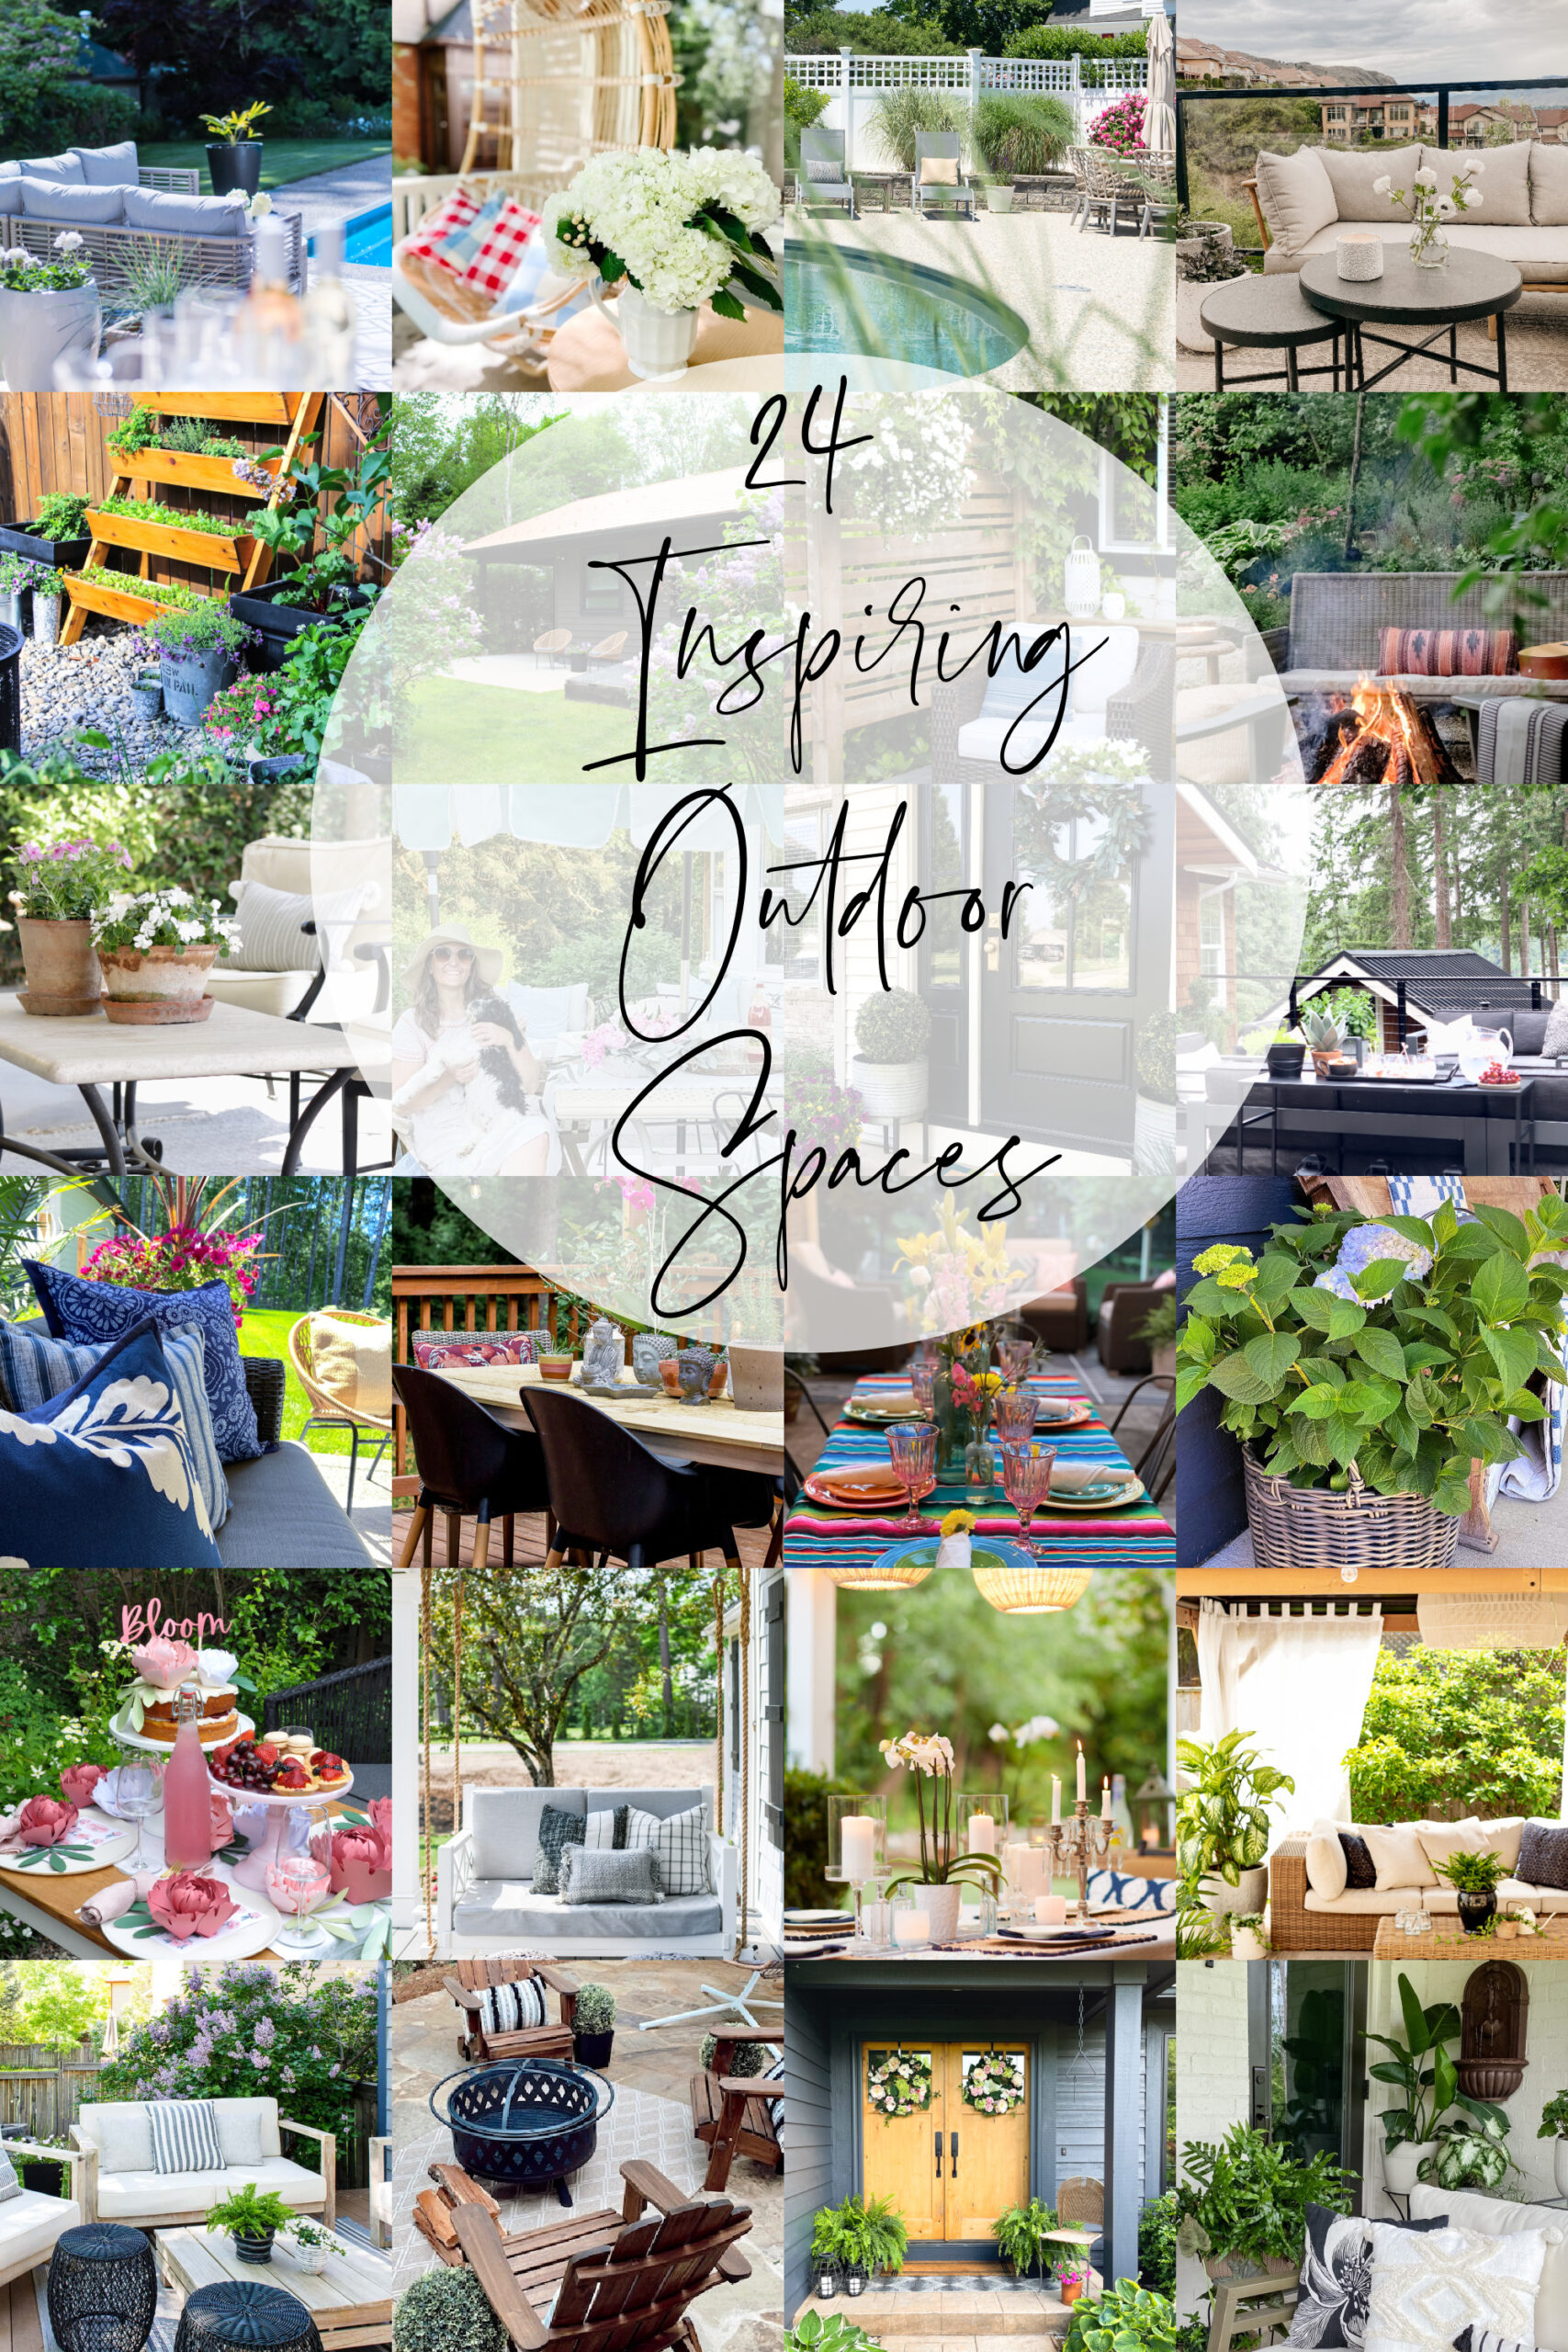 24 Inspiring Outdoor Spaces poster.